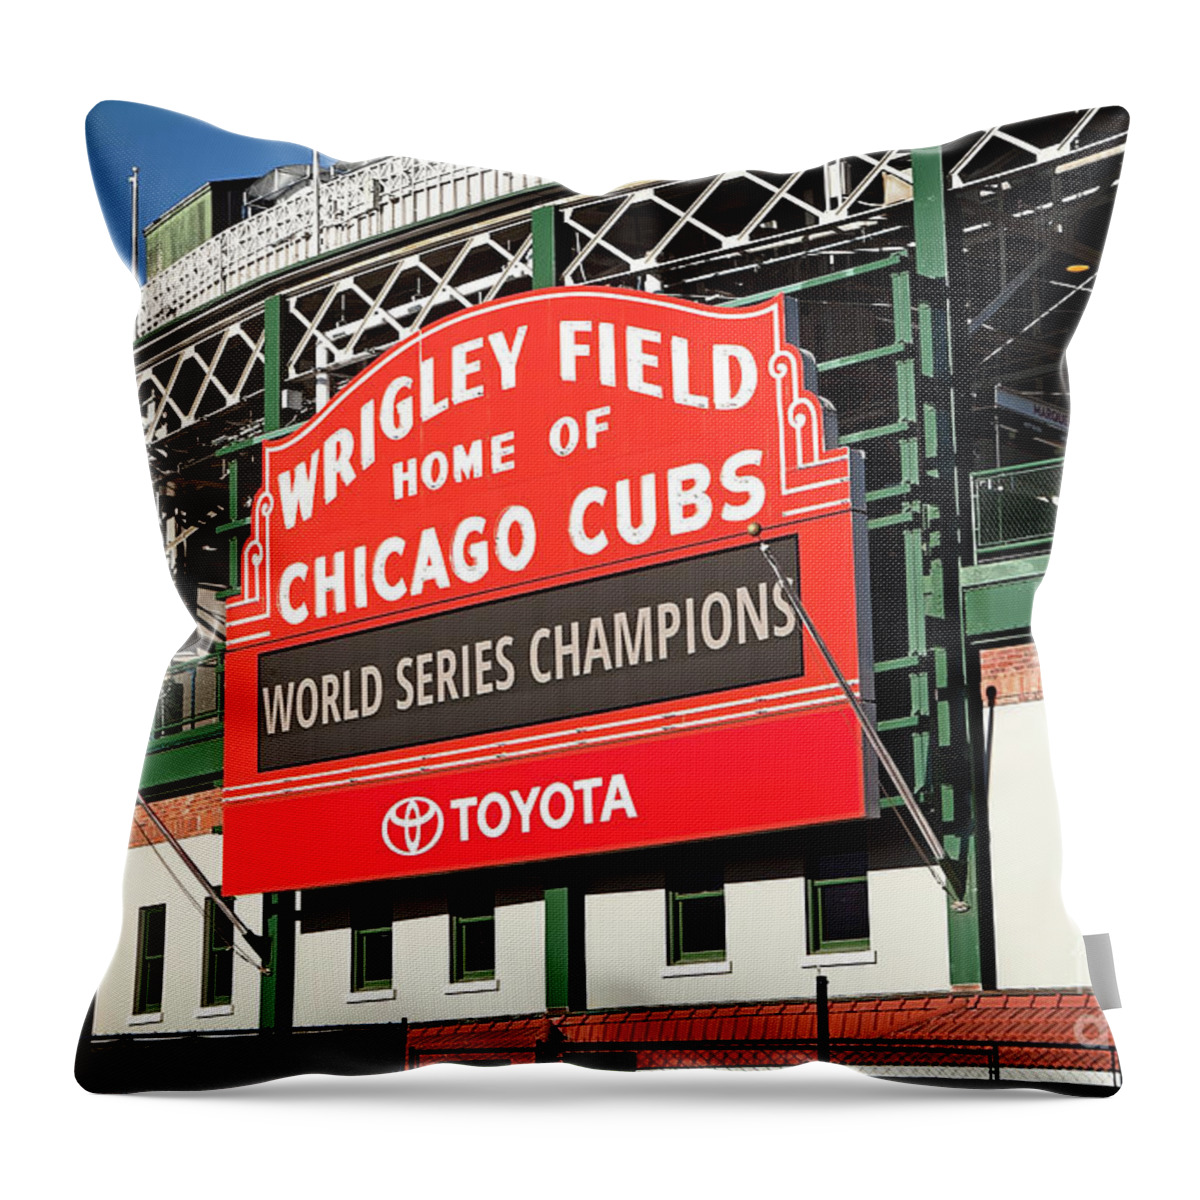 Wrigley Throw Pillow featuring the photograph 1280 Wrigley Field Sign by Steve Sturgill